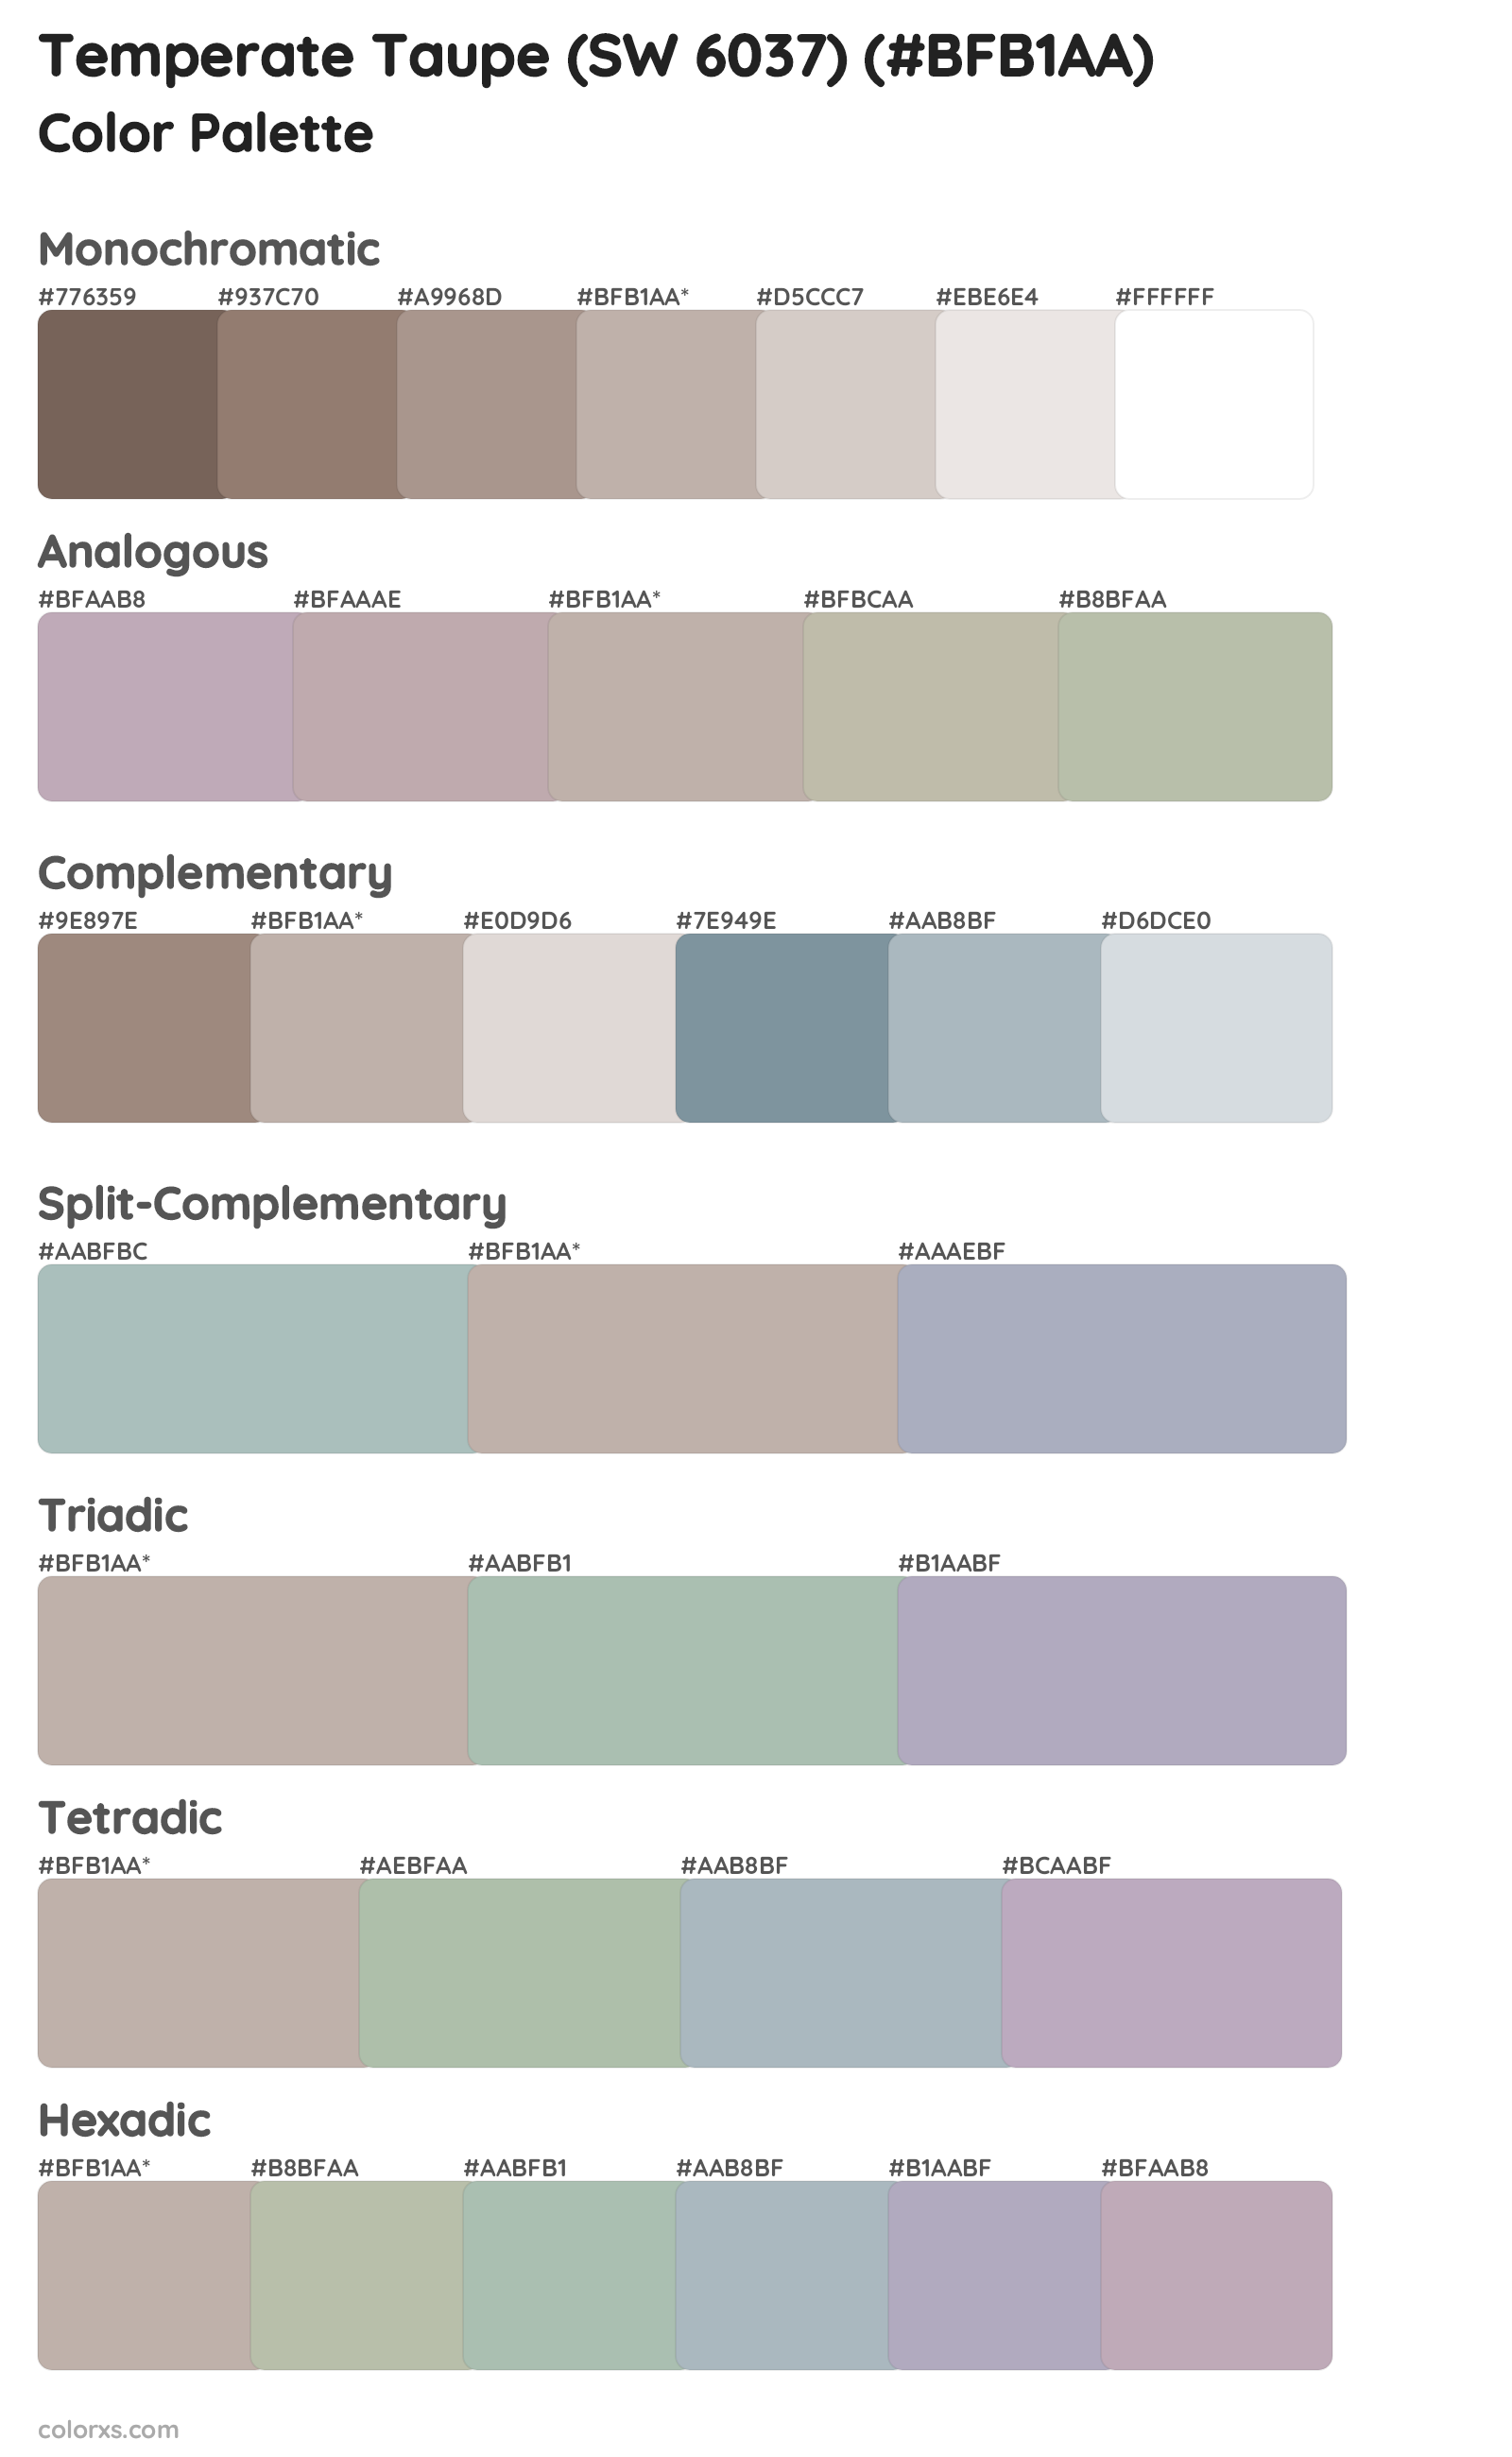 Temperate Taupe (SW 6037) Color Scheme Palettes